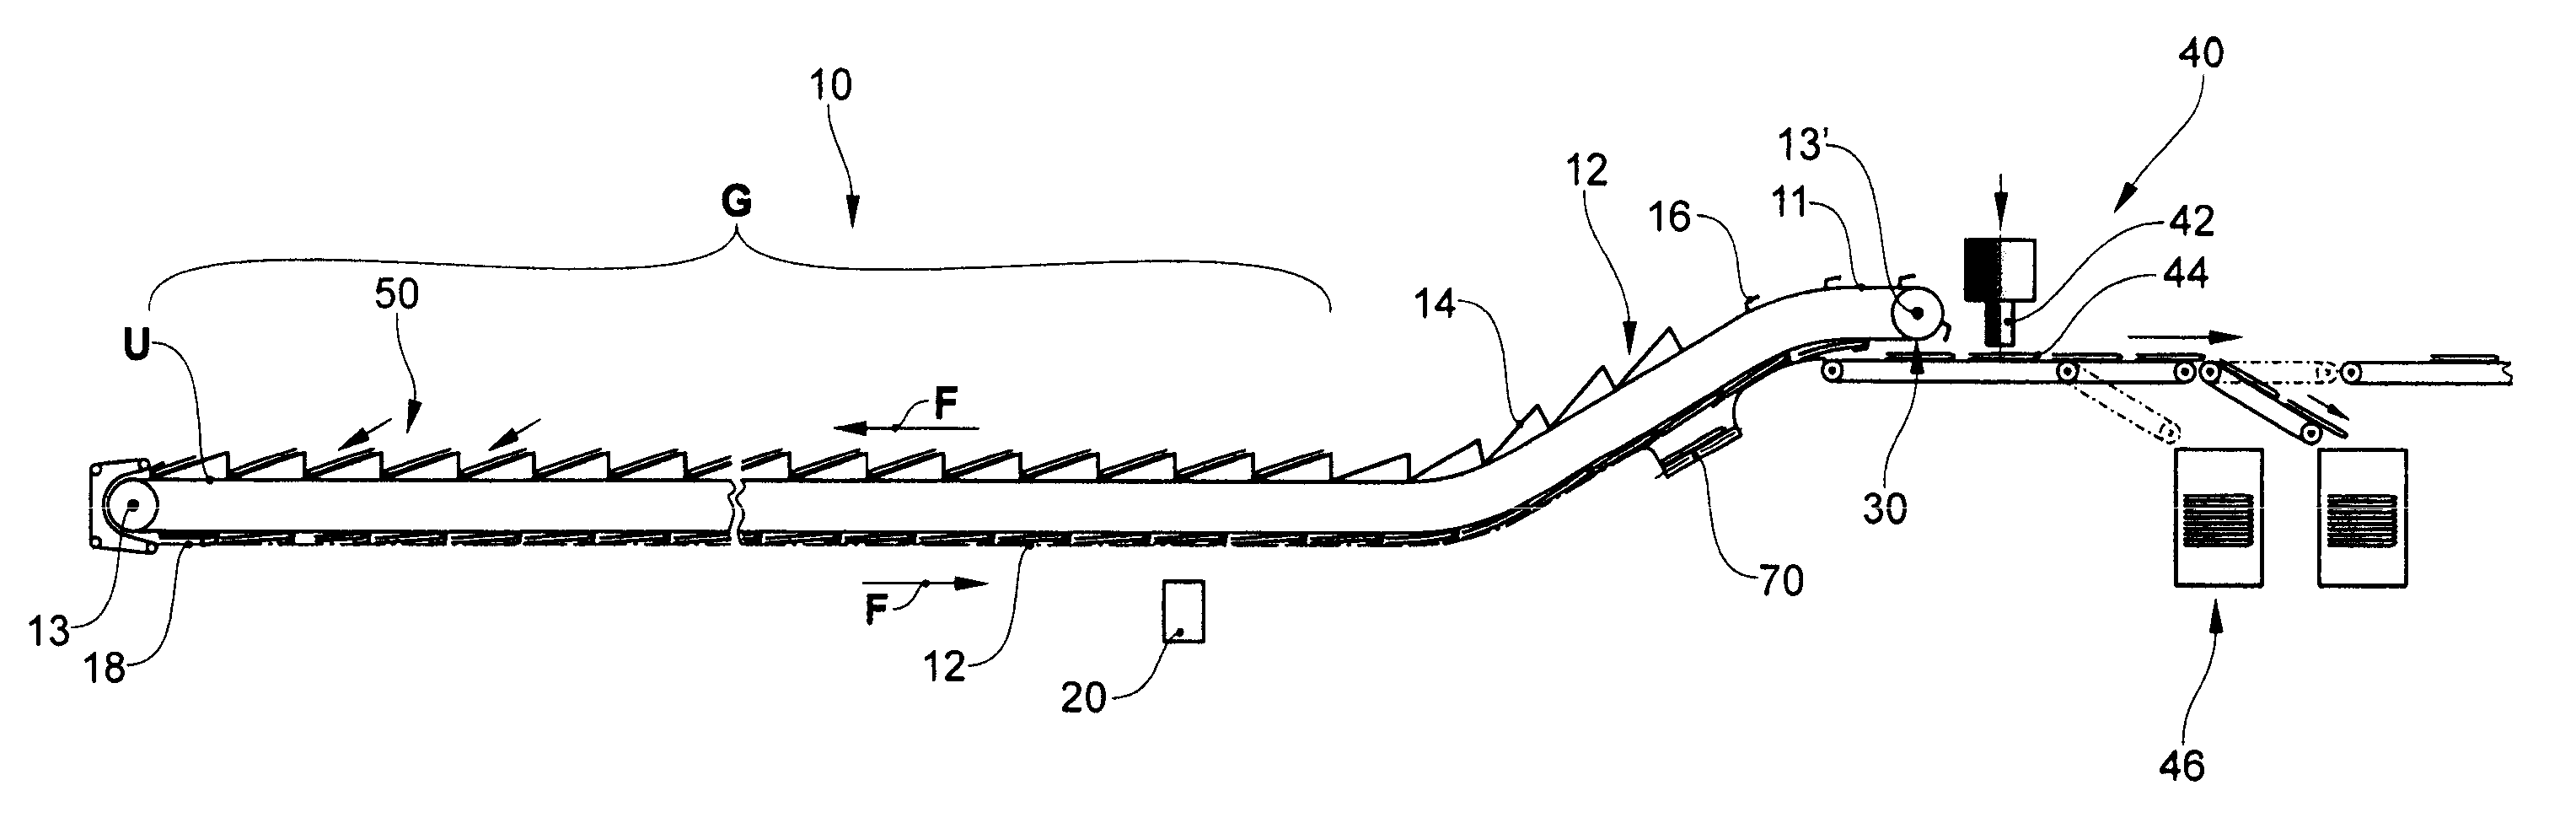 Method and device for creating a flow of flat products in a predefined sequence